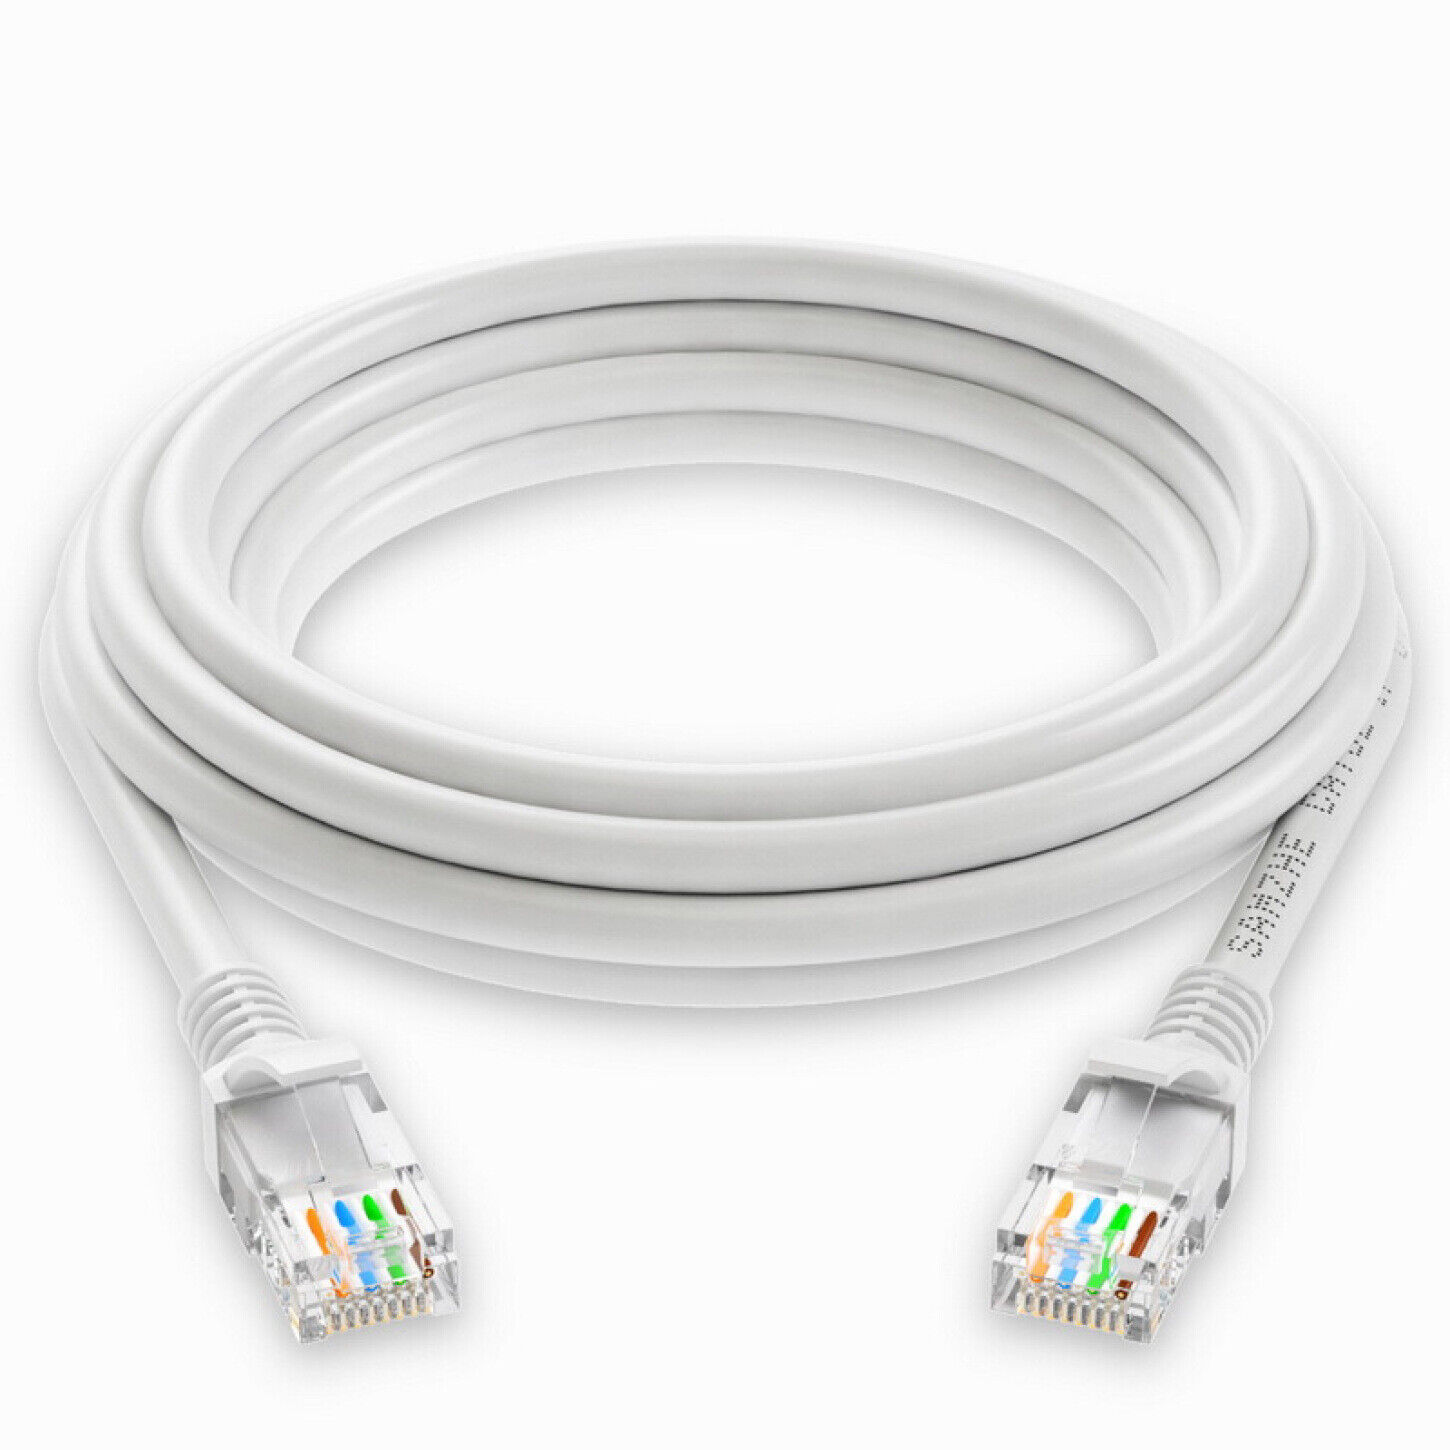 60FT Cat5E PoE IP Camera NVR Ethernet Cable Outdoor/Indoor RJ45 Jacks Cord Wire